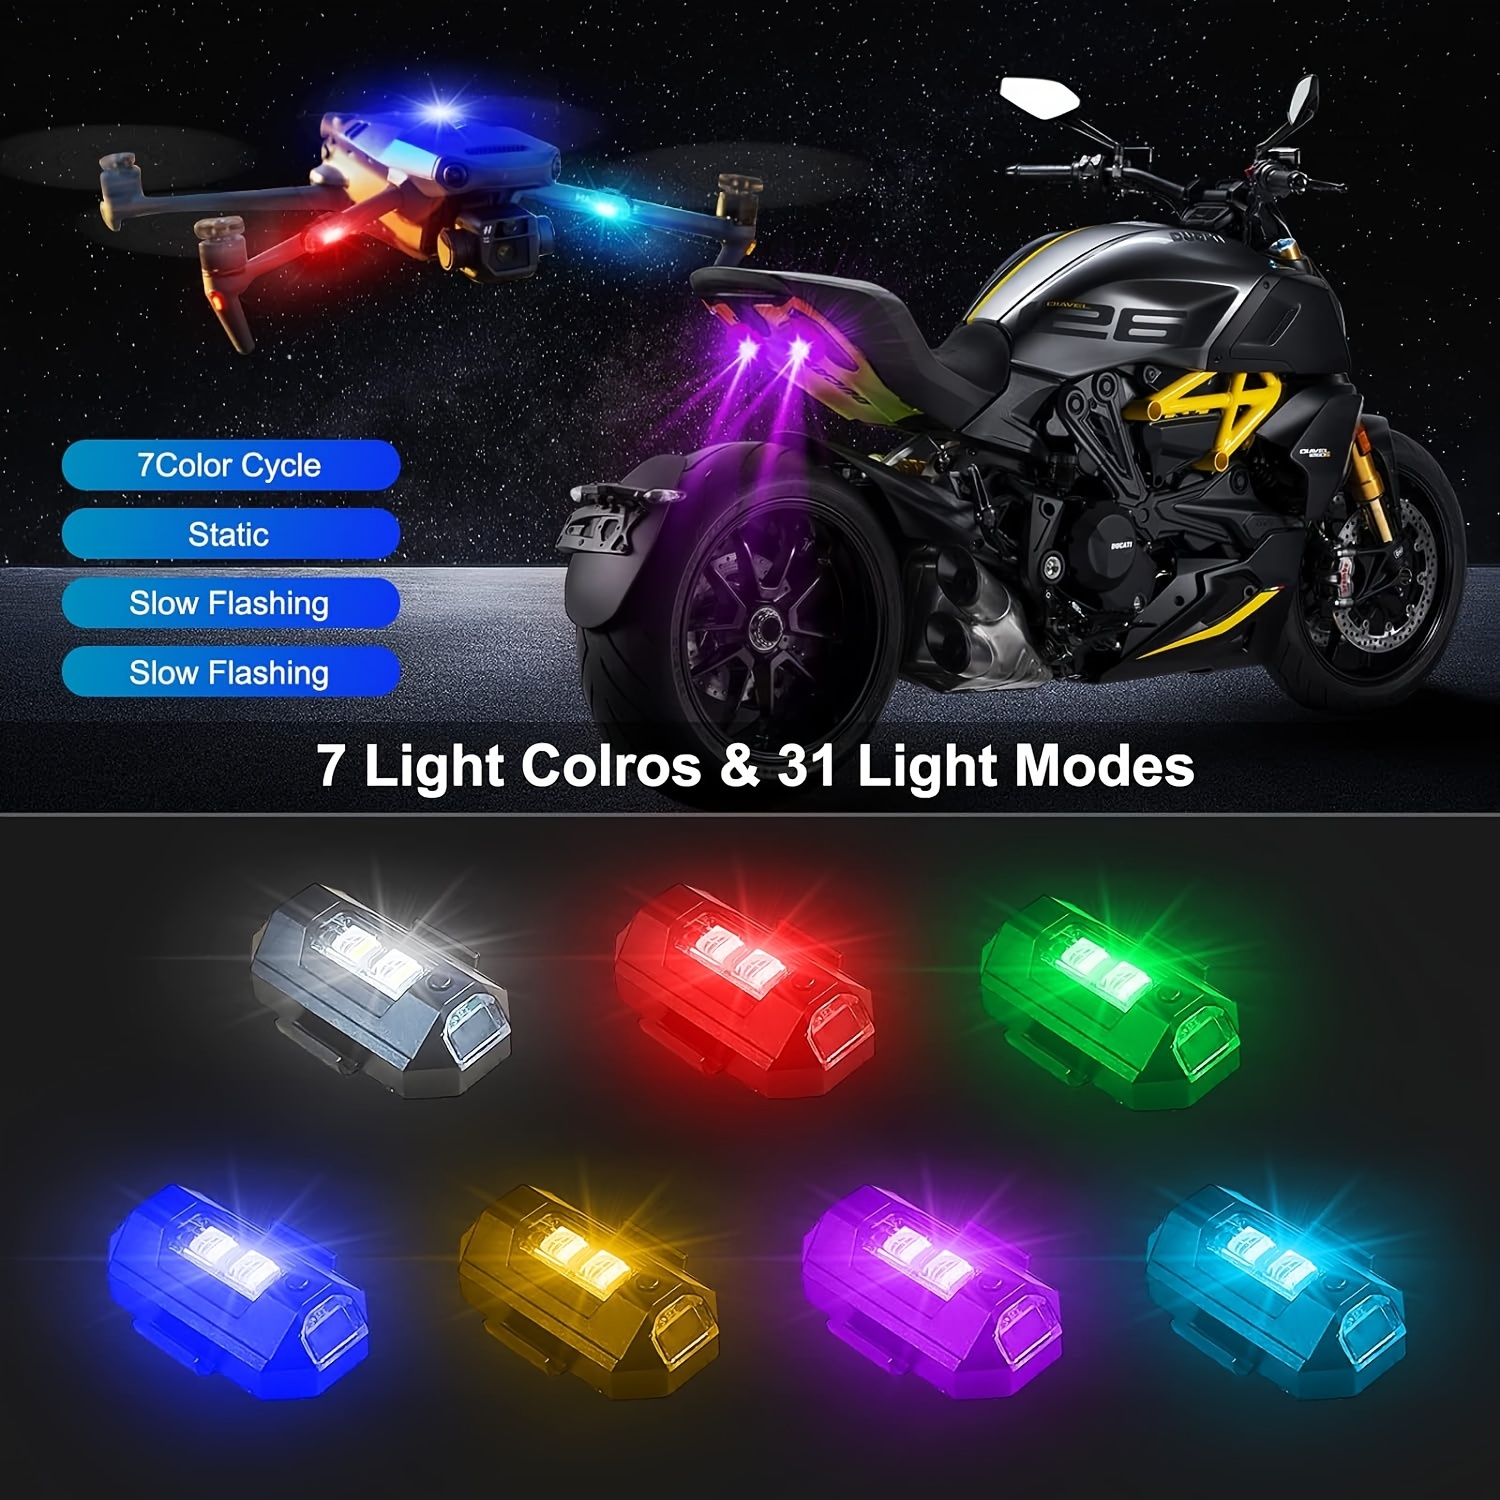 7COLORS LED AIRCRAFT STROBE LIGHTS USB CHARGING MOTORBIKE MODIFIED